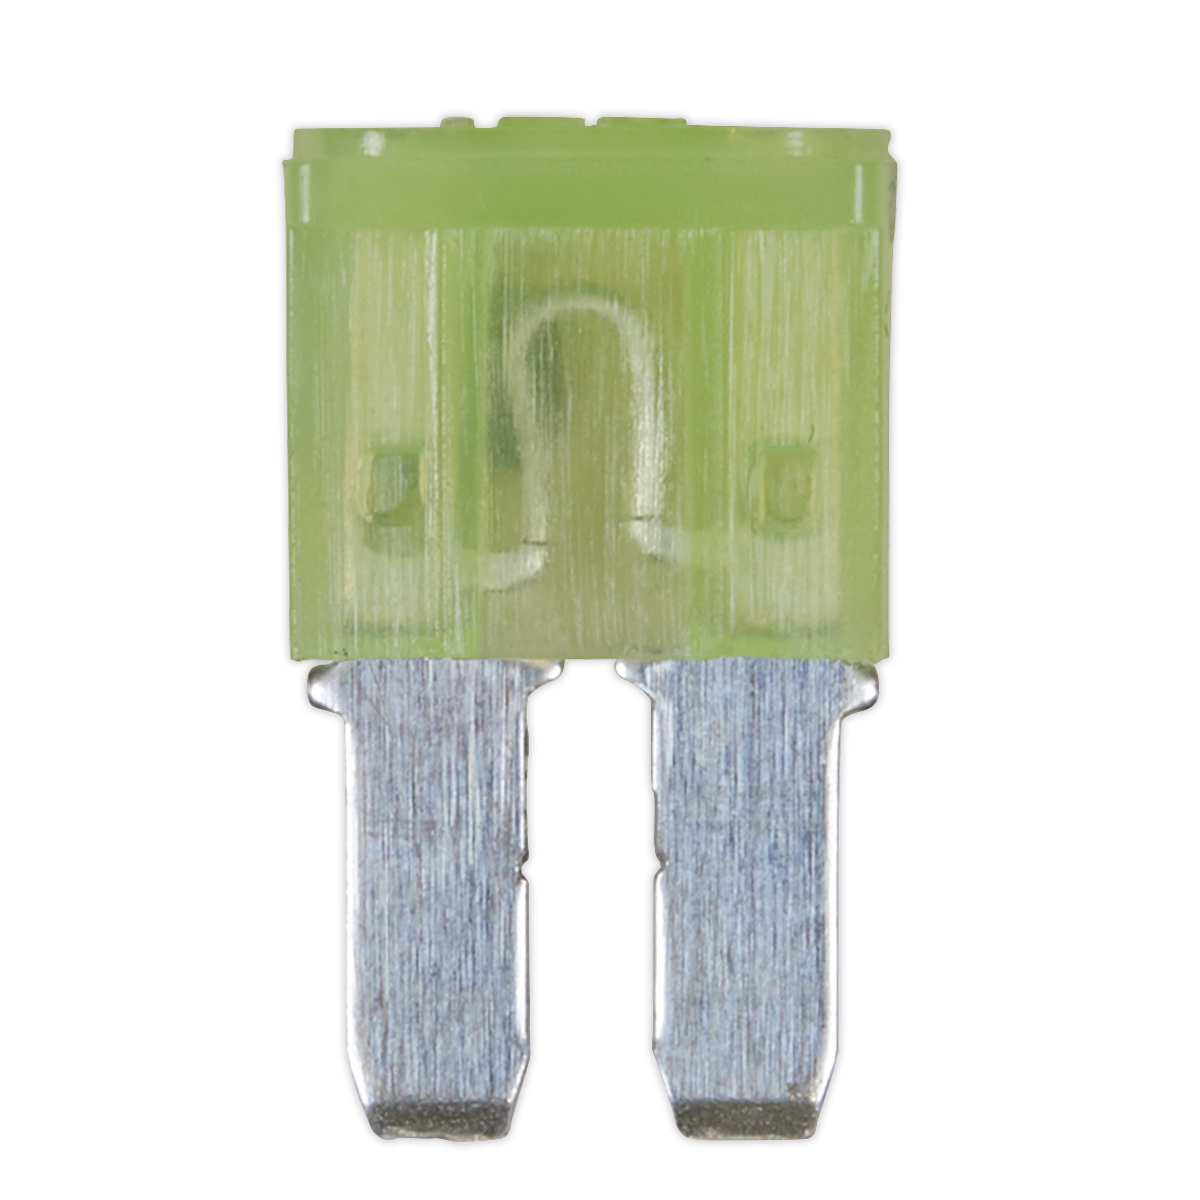 Automotive MICRO II Blade Fuse 20A - Pack of 50 - M2BF20 - Farming Parts